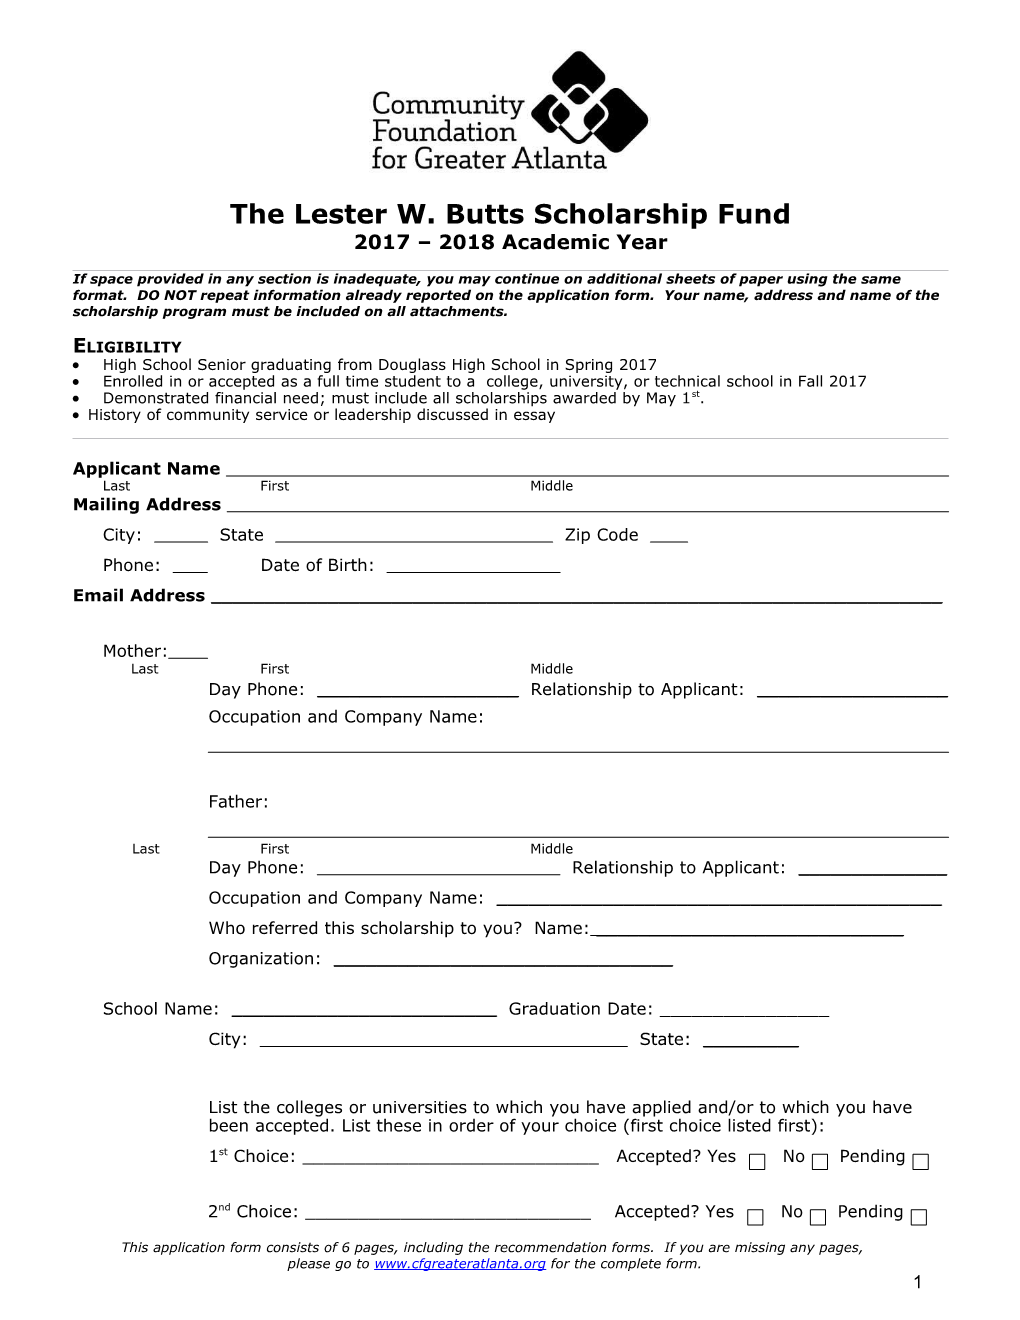 The Lester W. Butts Scholarship Fund